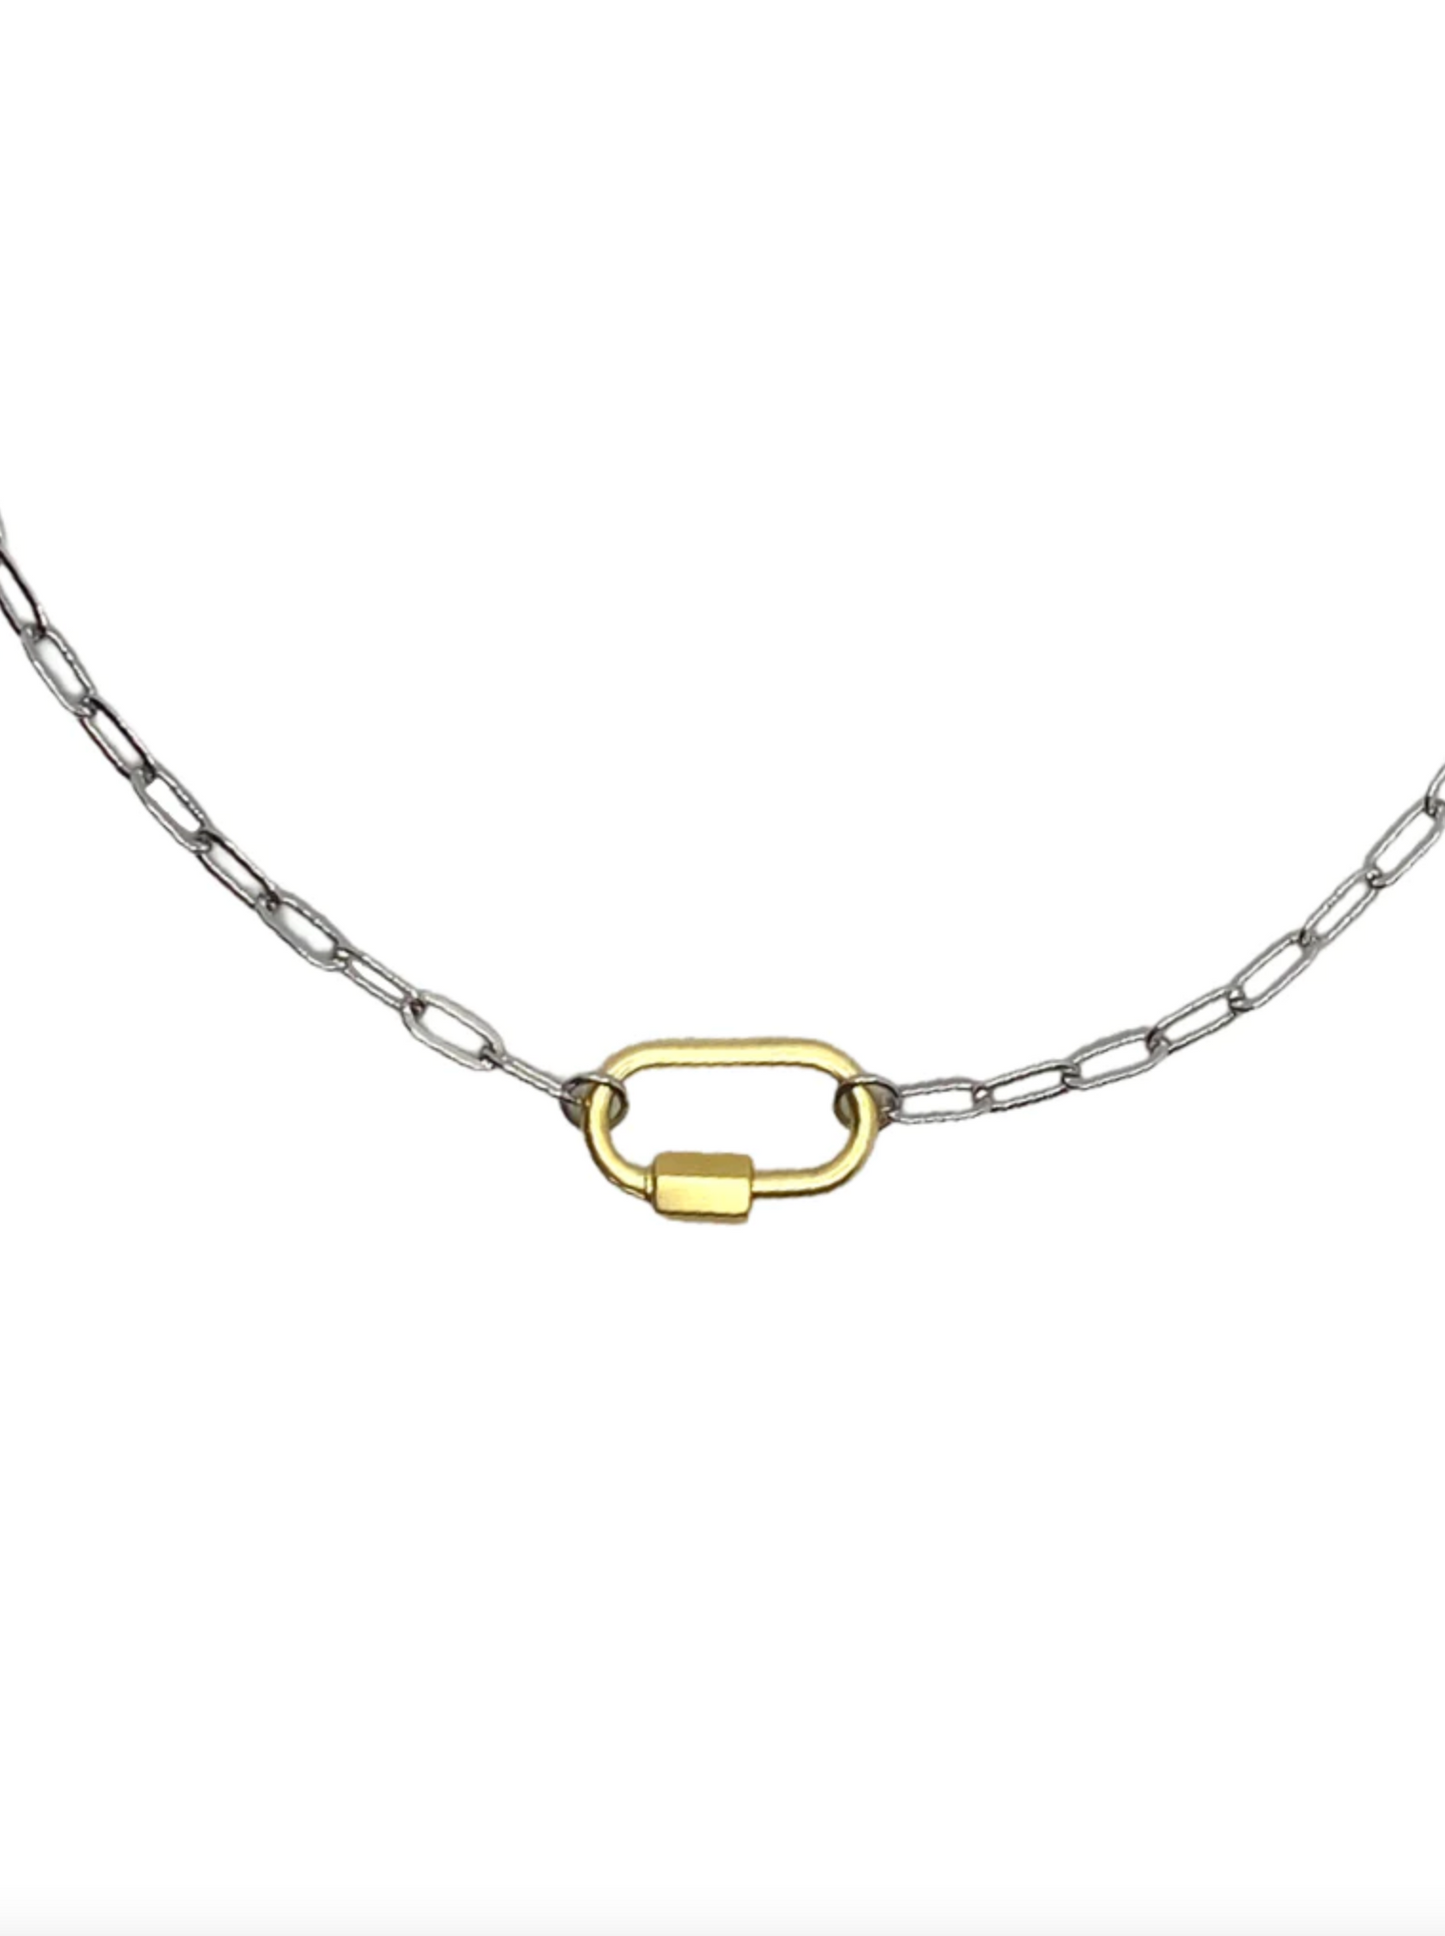 Clingy Carabiner  Gold/Silver Necklace Necklaces in  at Wrapsody